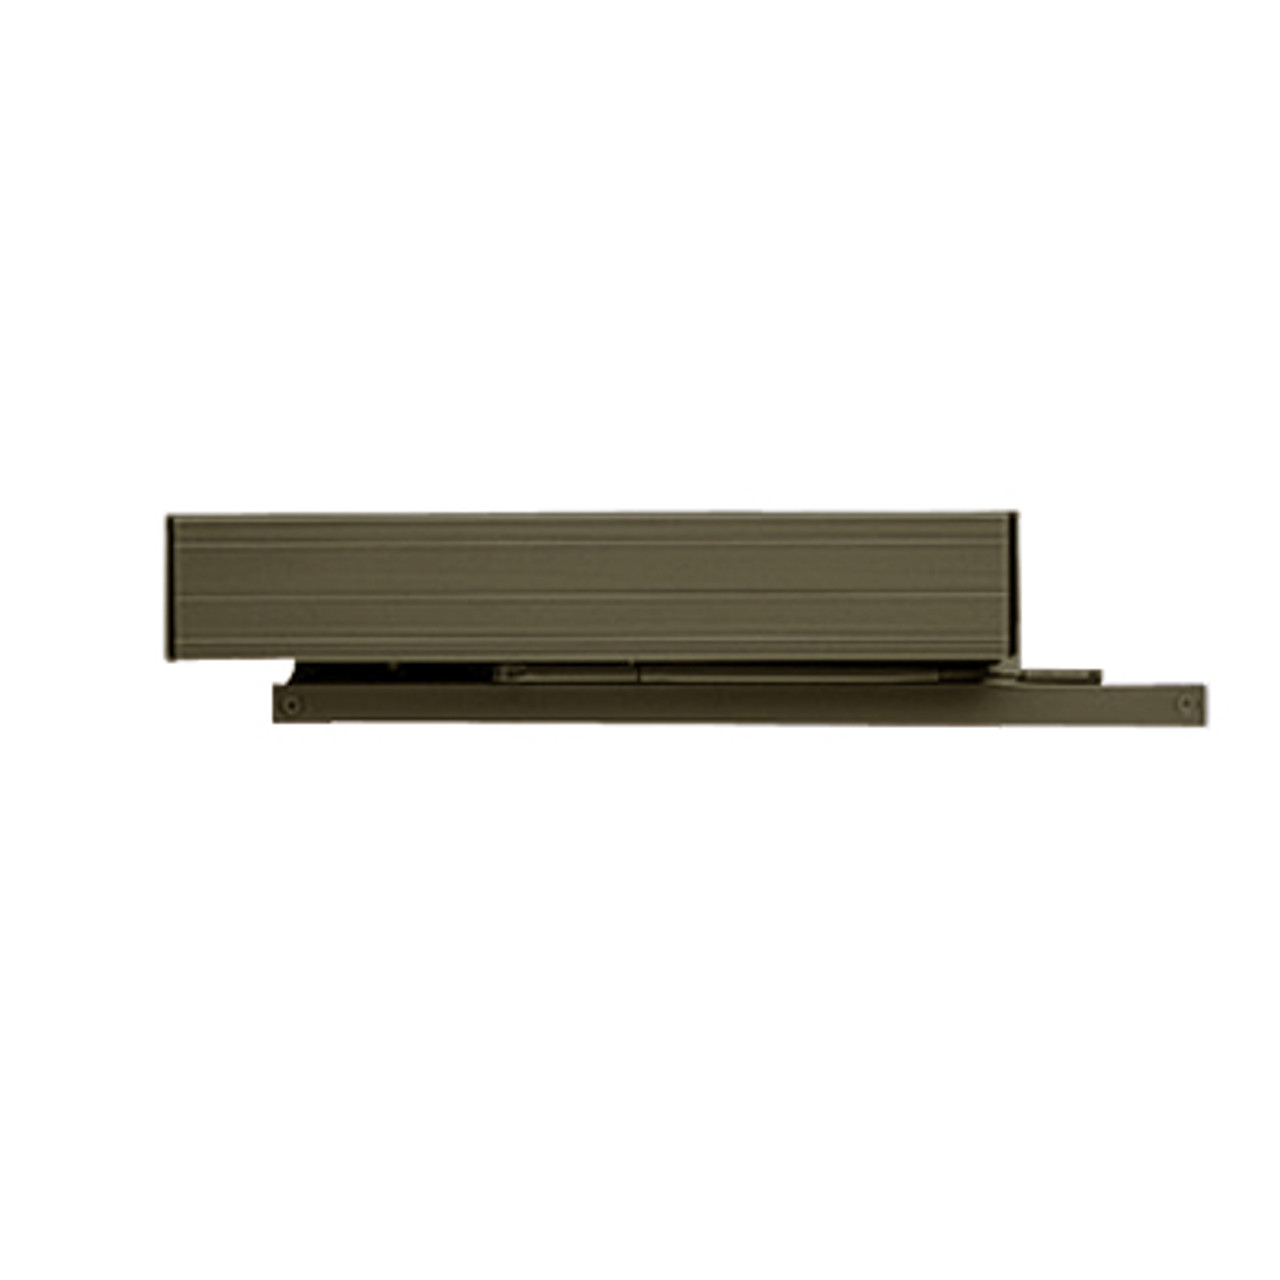 4841-CUSH-US10B LCN Door Closer with Cush-n-Stop Arm in Oil Rubbed Bronze Finish